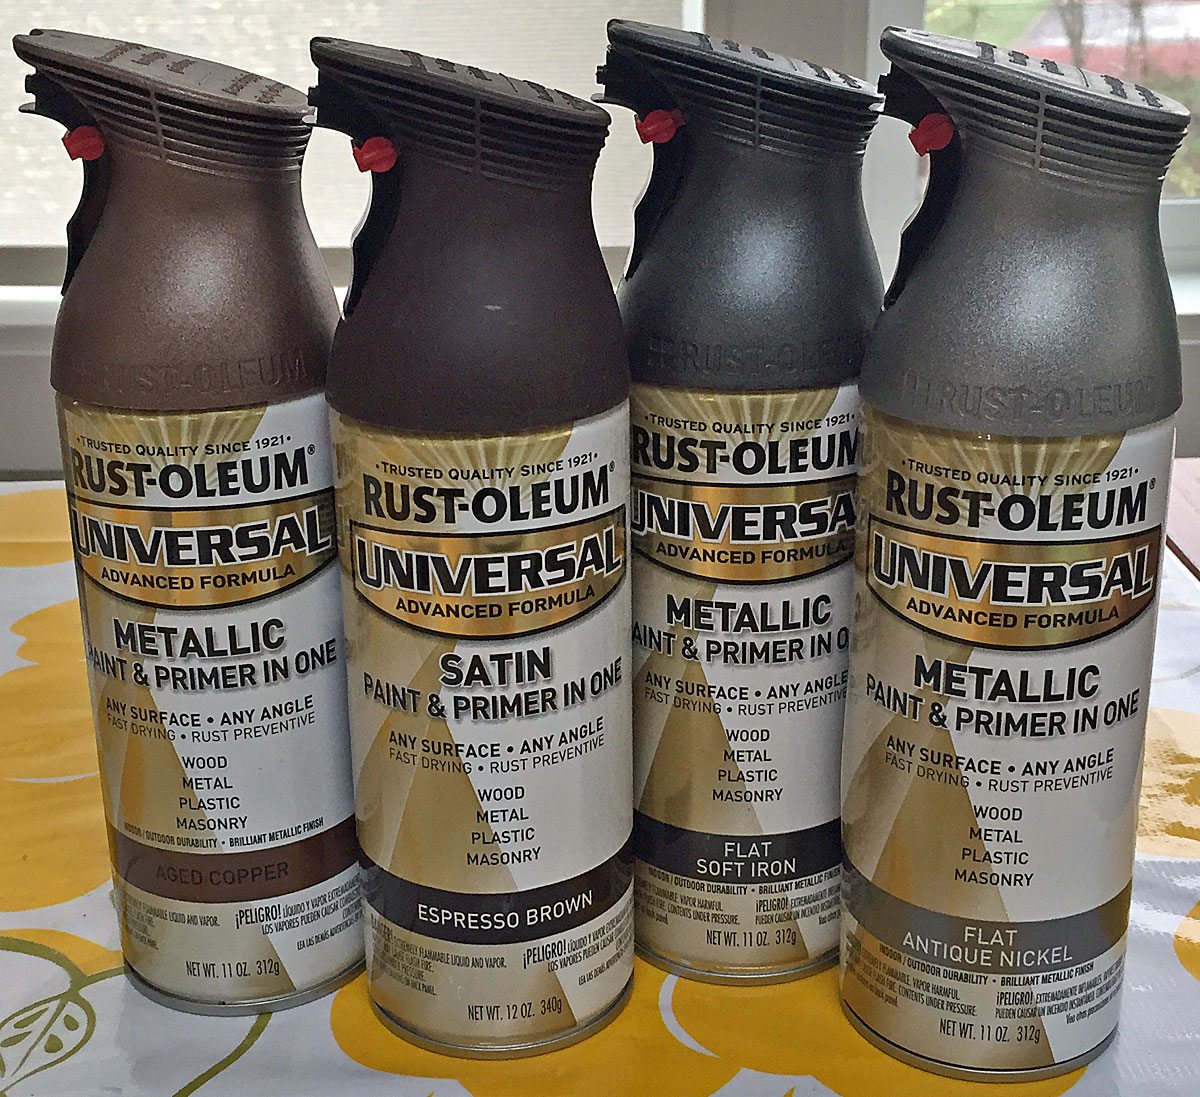 Metallic paints. Photo by Will James.